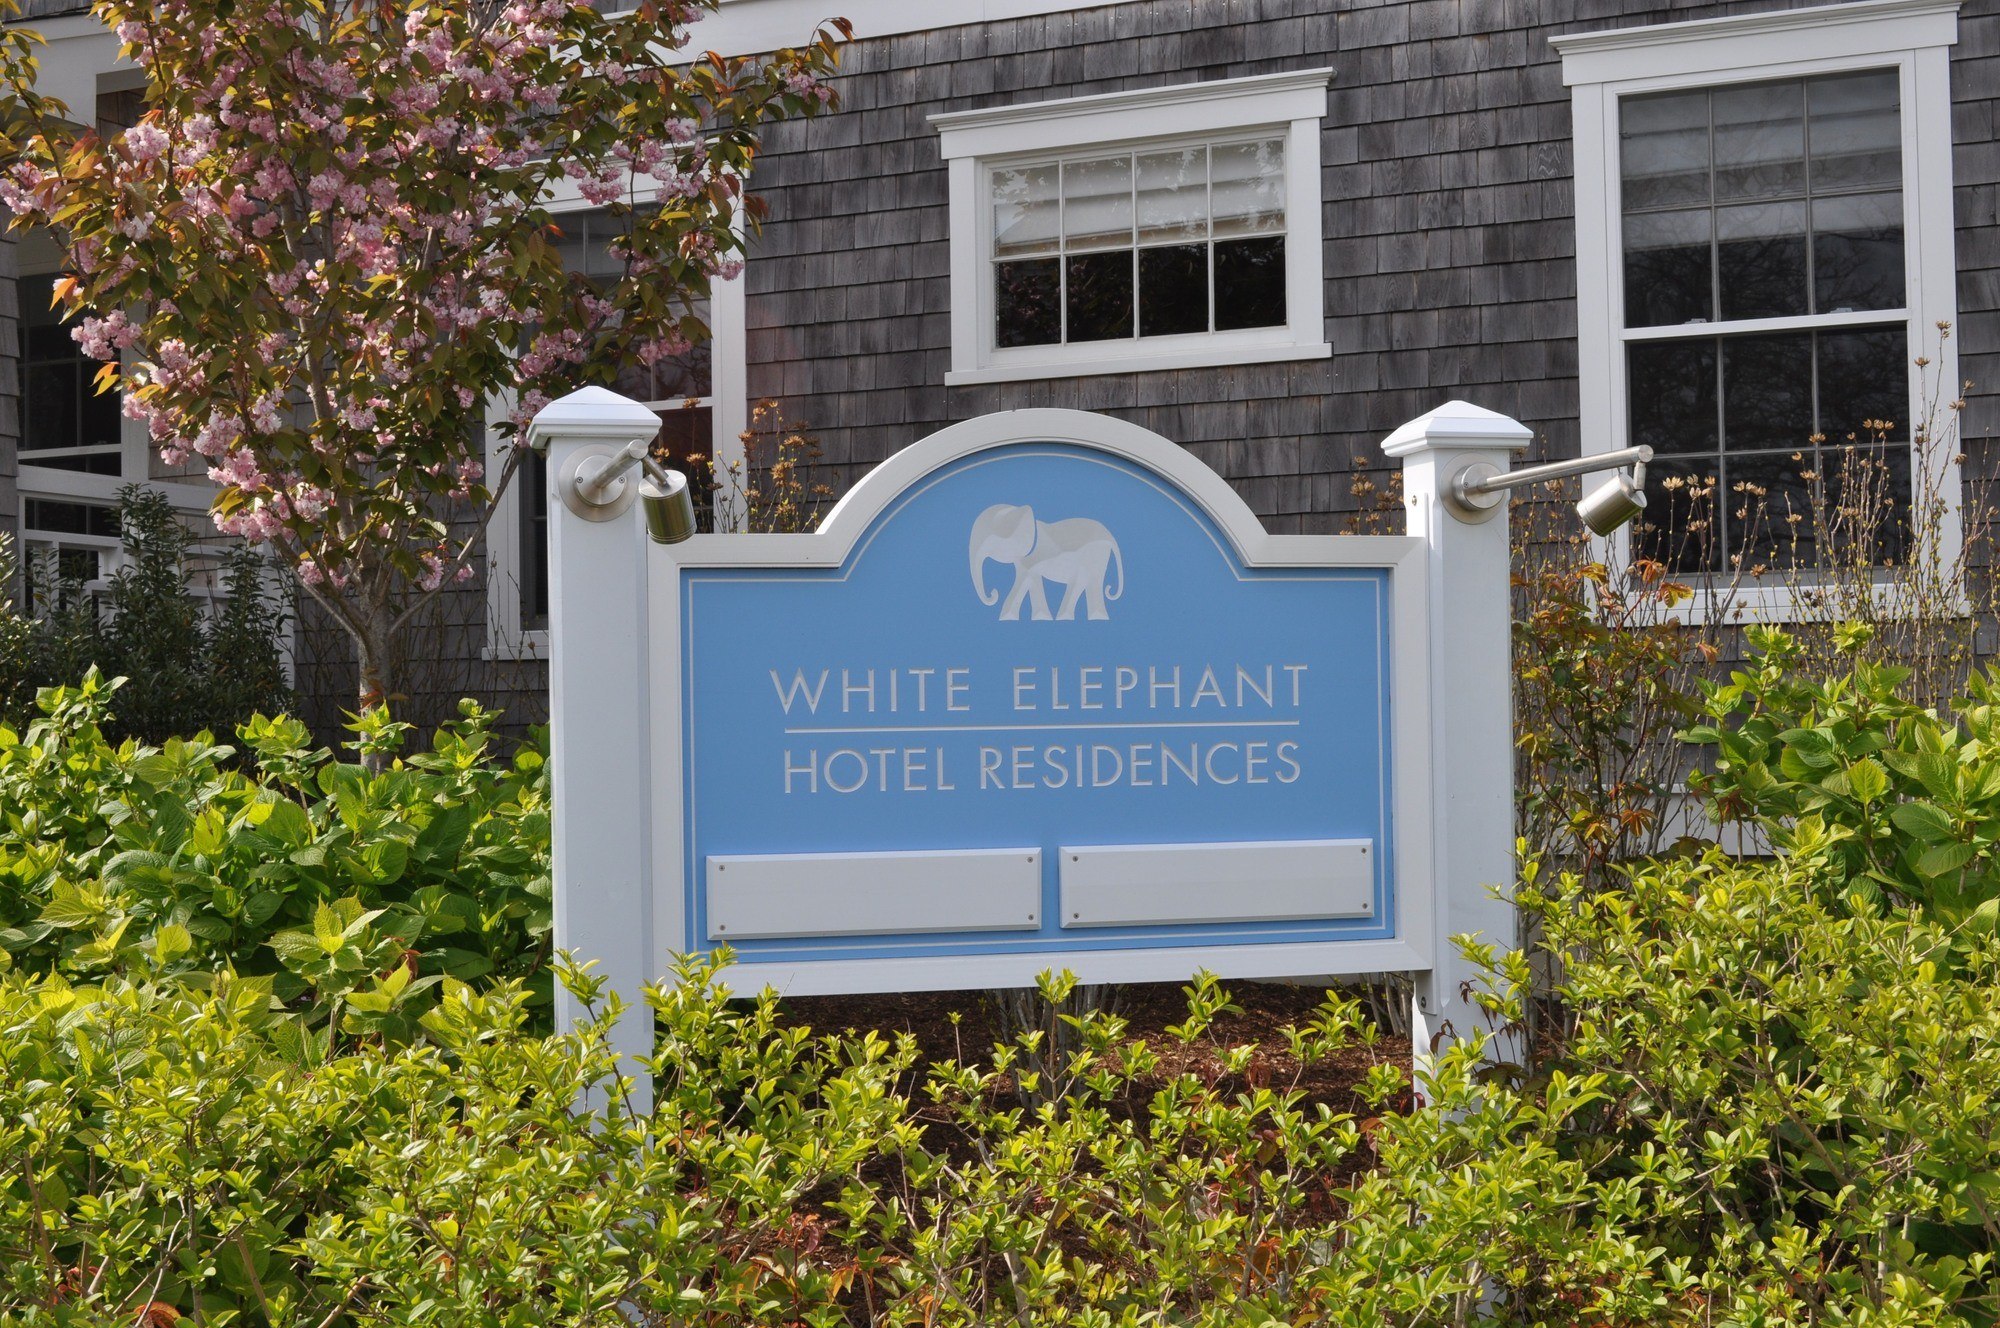 The White Elephant in Nantucket